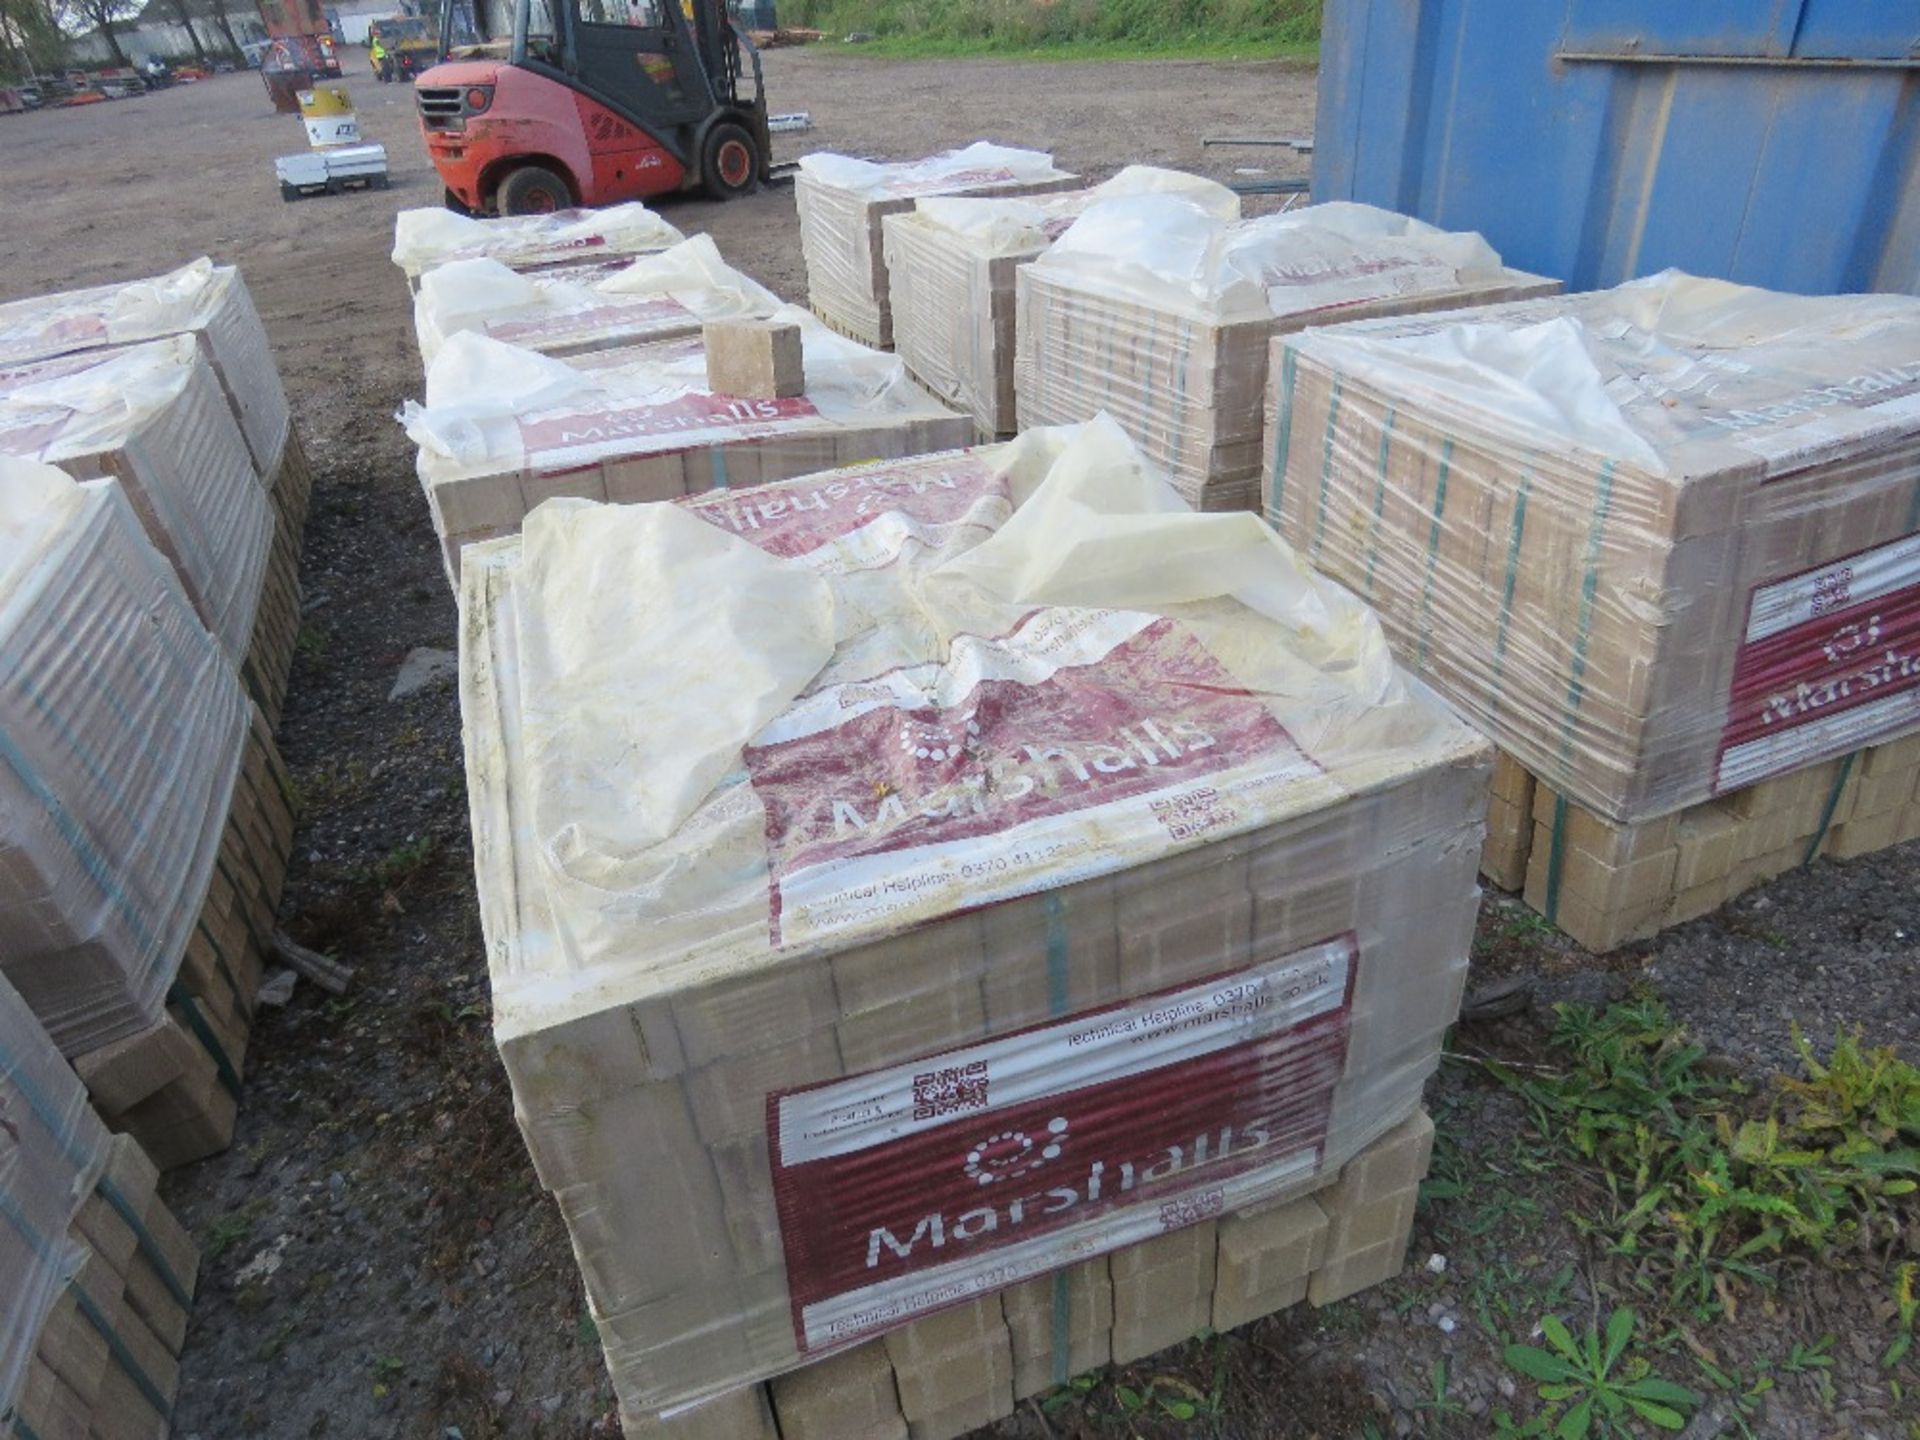 4 X PACKS OF MARSHALL HARVEST BUFF PAVERS, UNUSED. THIS LOT IS SOLD UNDER THE AUCTIONEERS MARGIN - Image 5 of 5